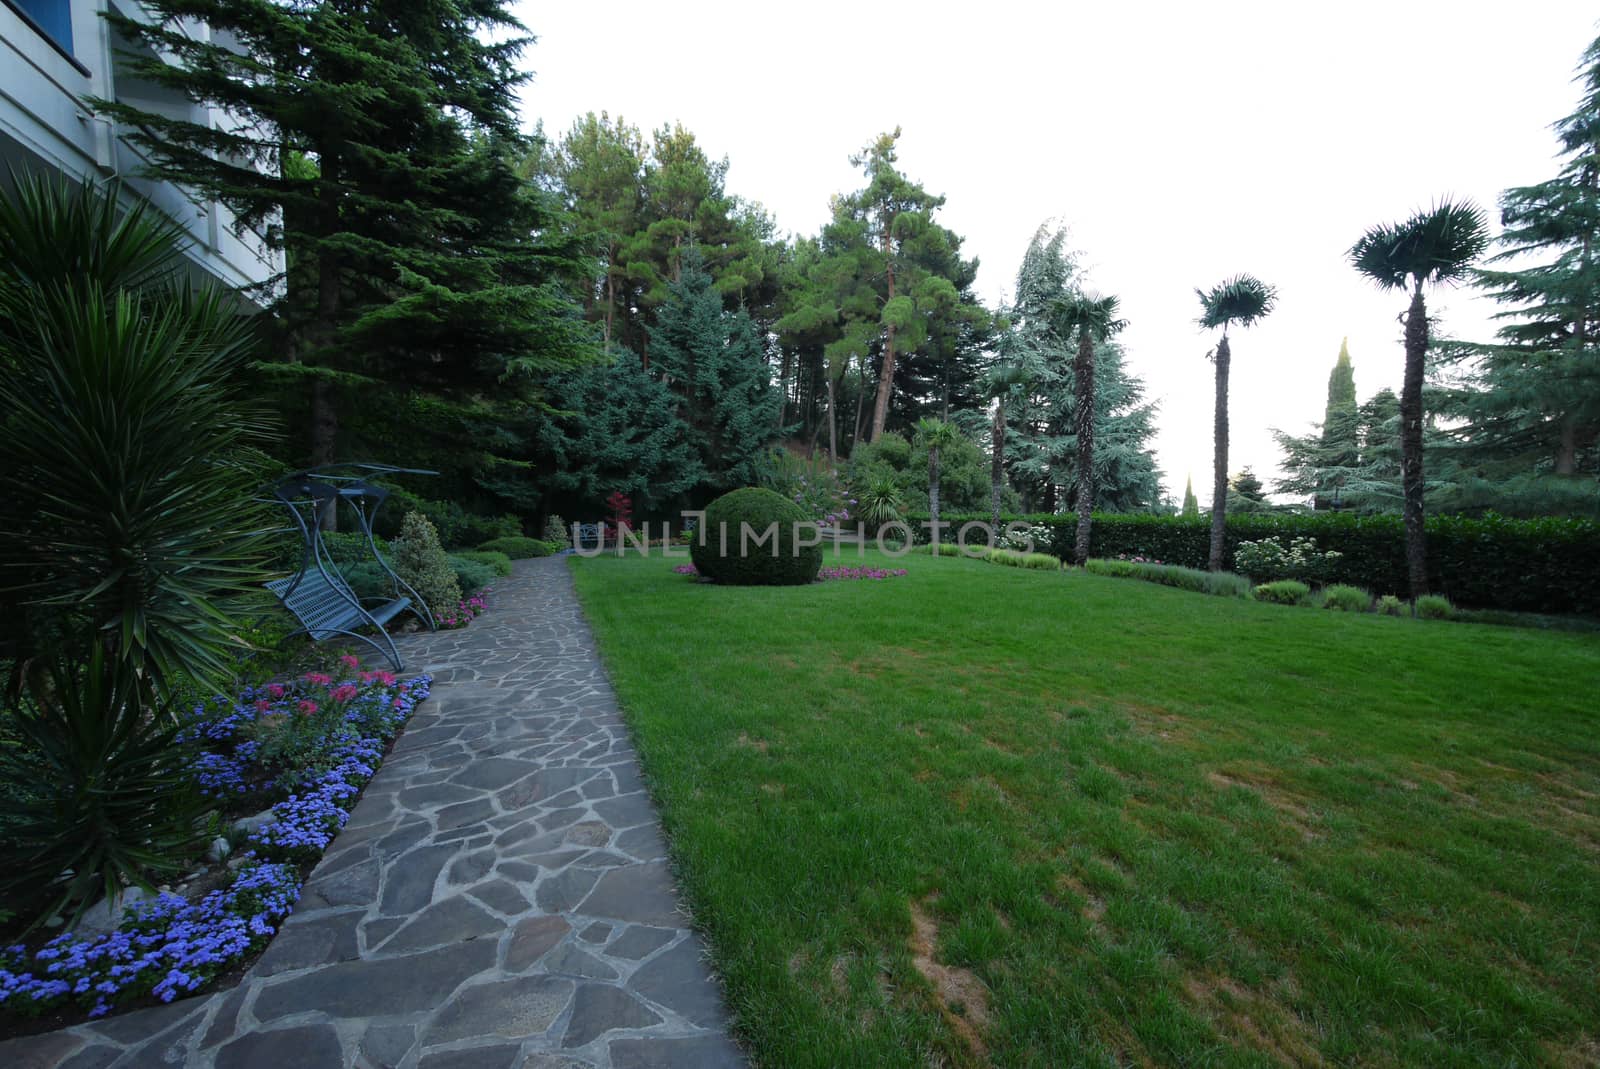 A park with a stone lined path is planted with various ornamental plants under the windows of the house. by Adamchuk